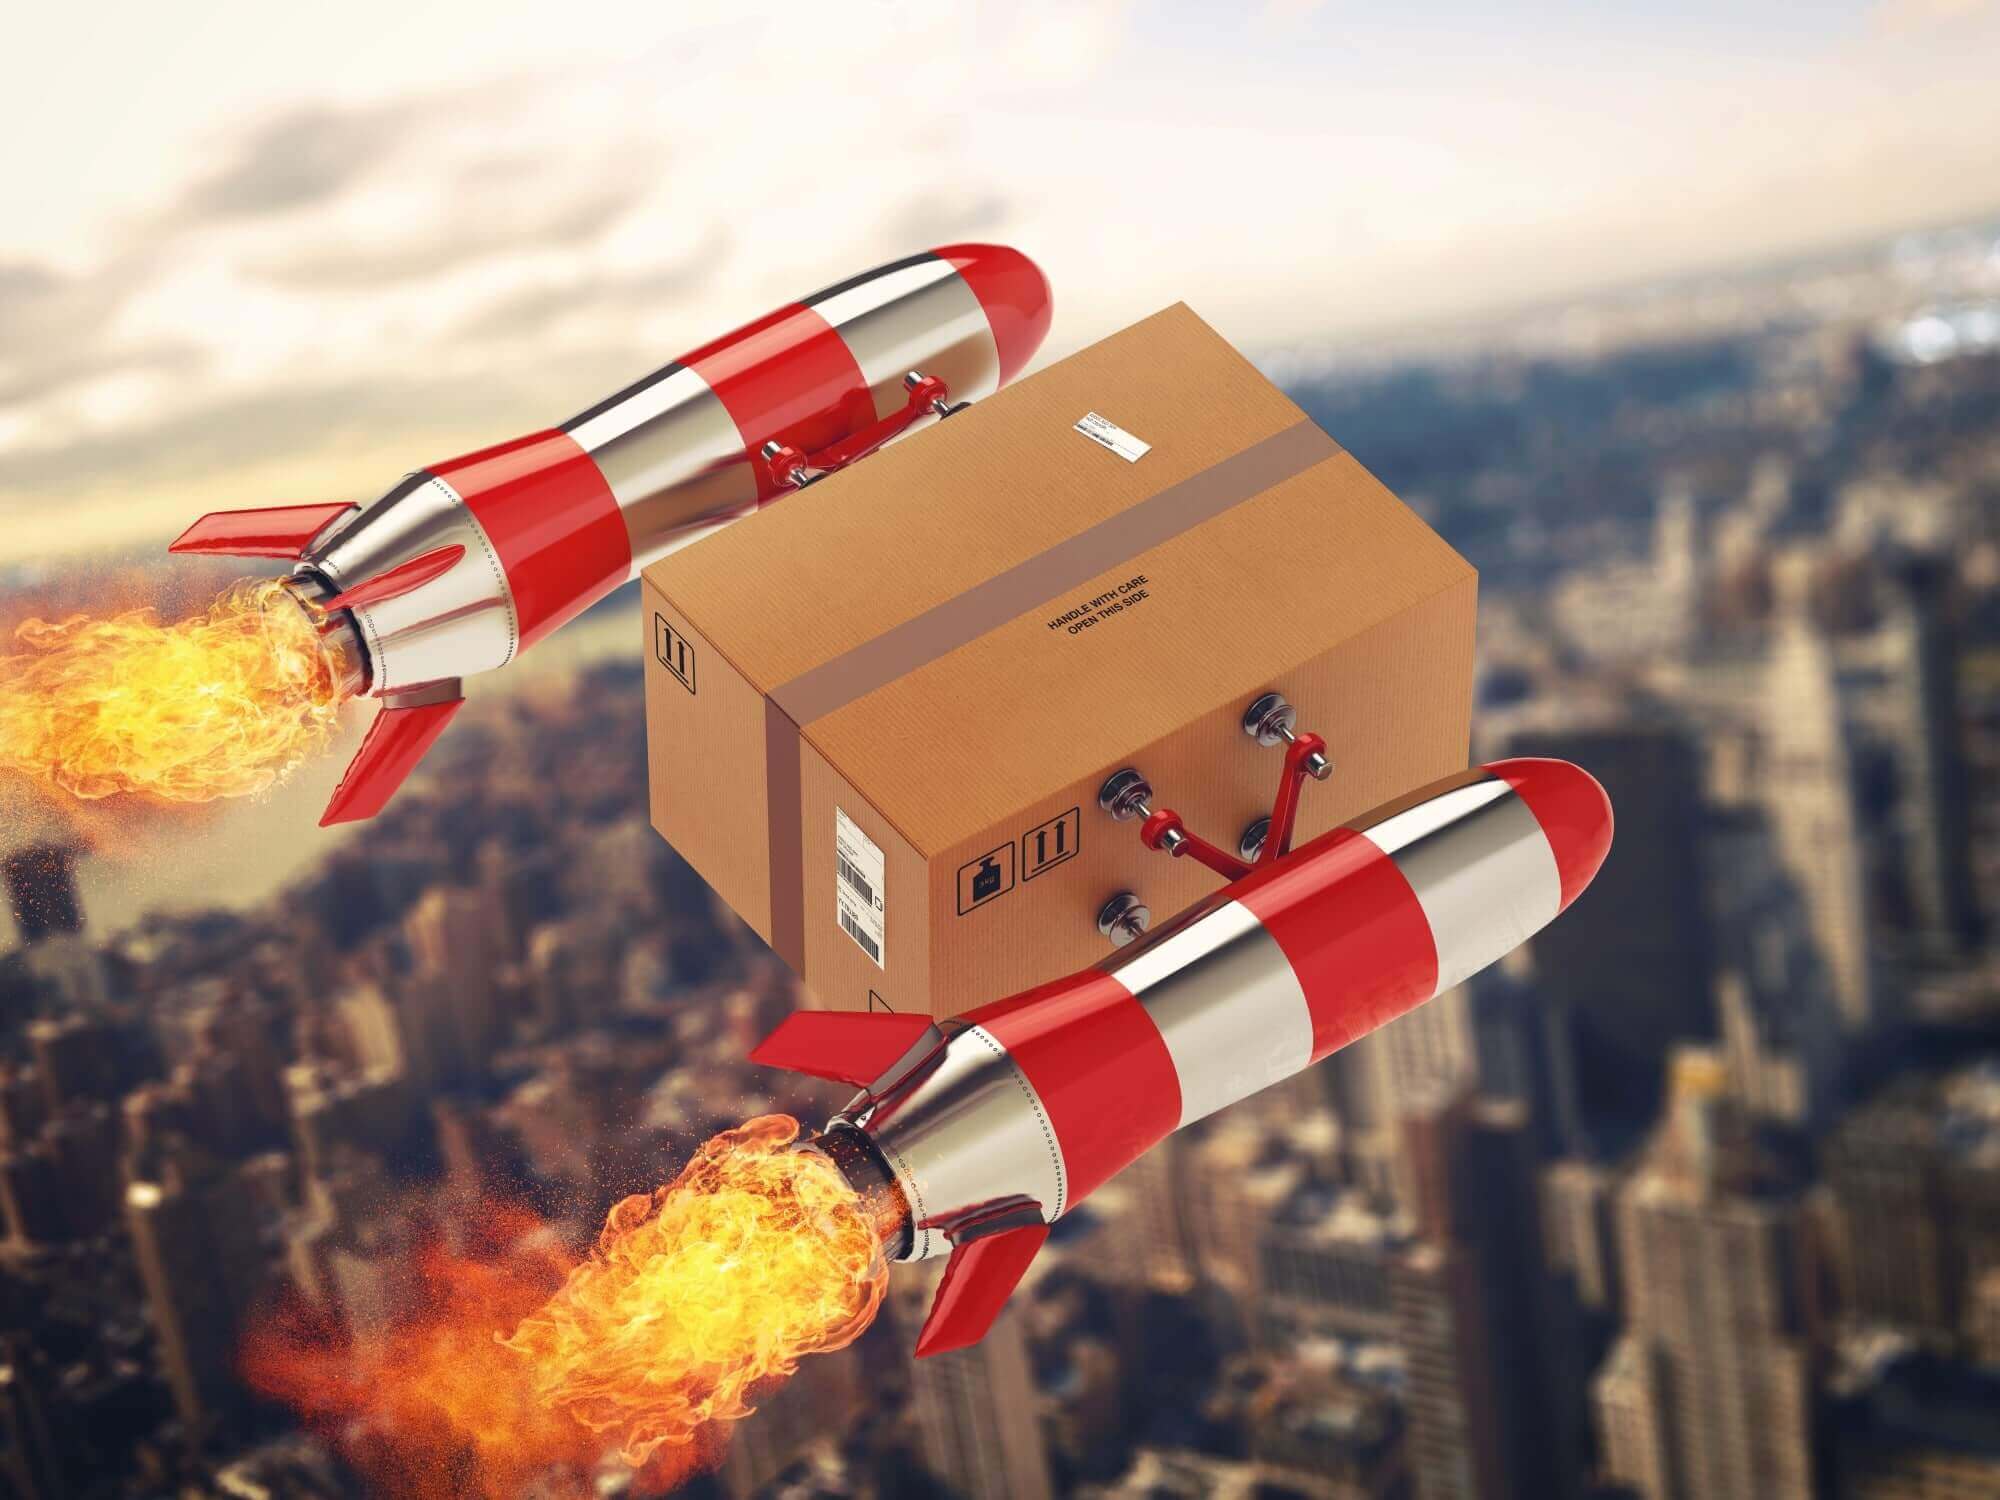 illustration of a cardboard package attached to two rockets that carry it flying through the city sky